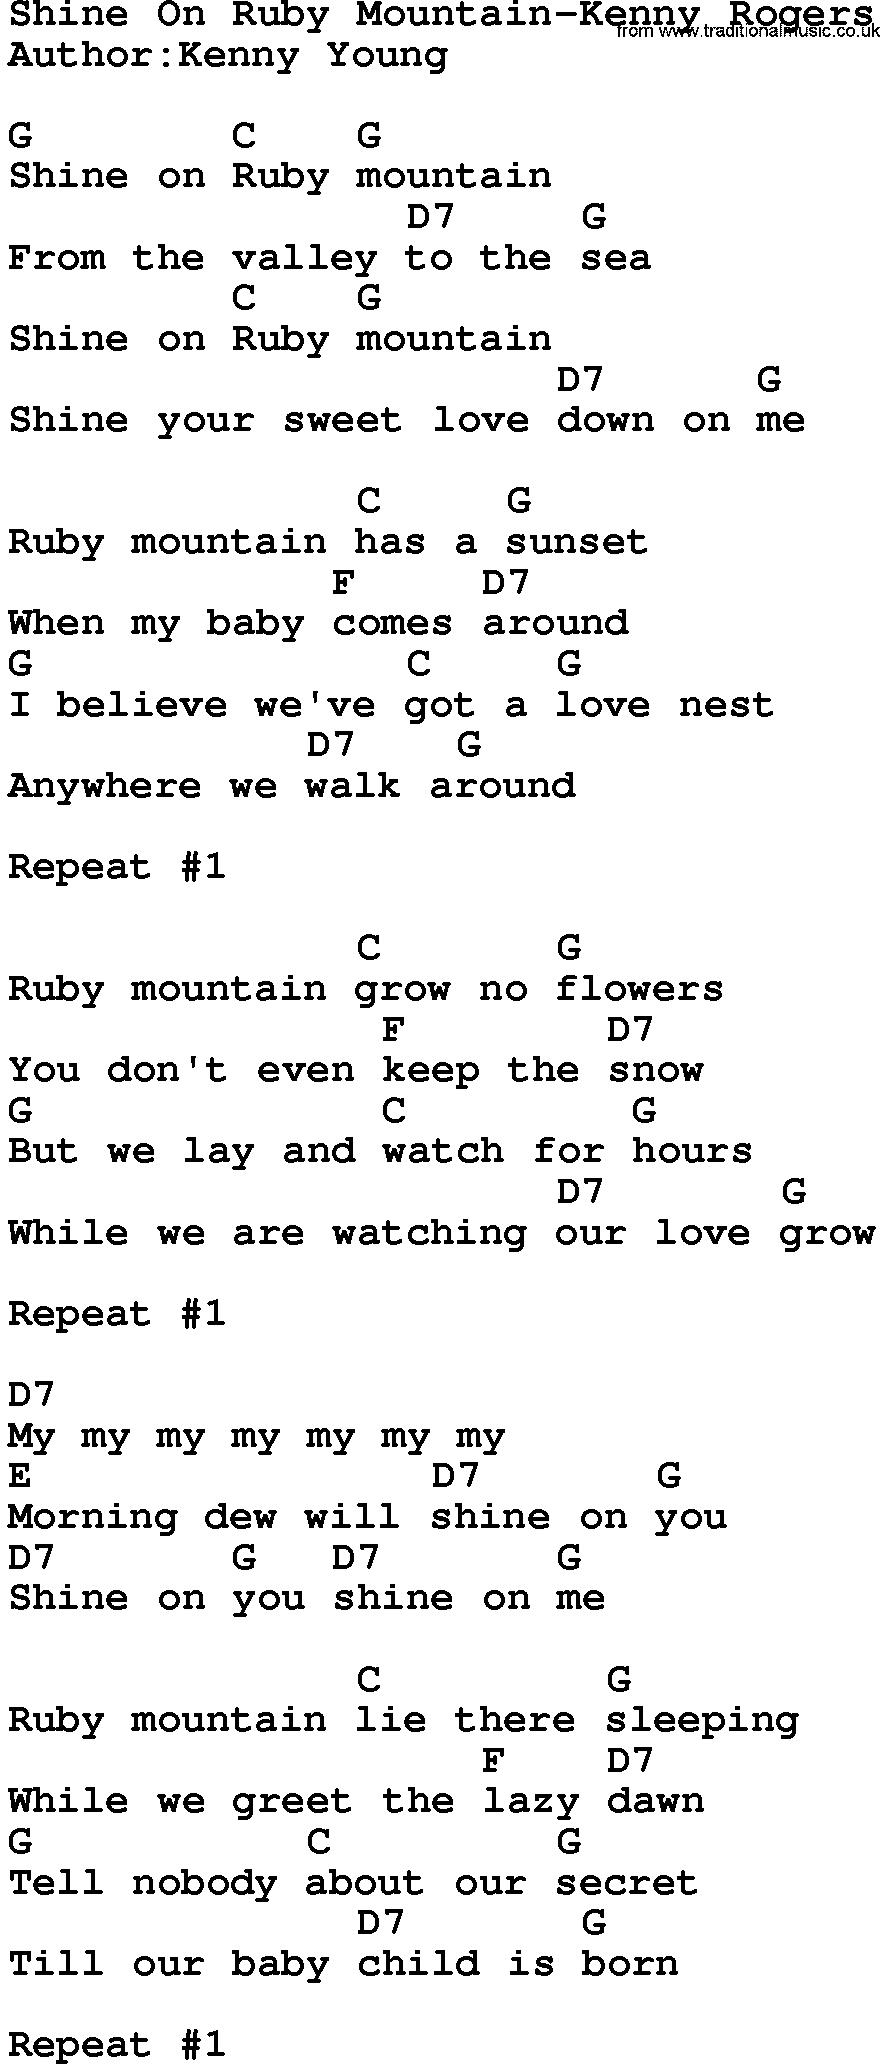 Country music song: Shine On Ruby Mountain-Kenny Rogers lyrics and chords